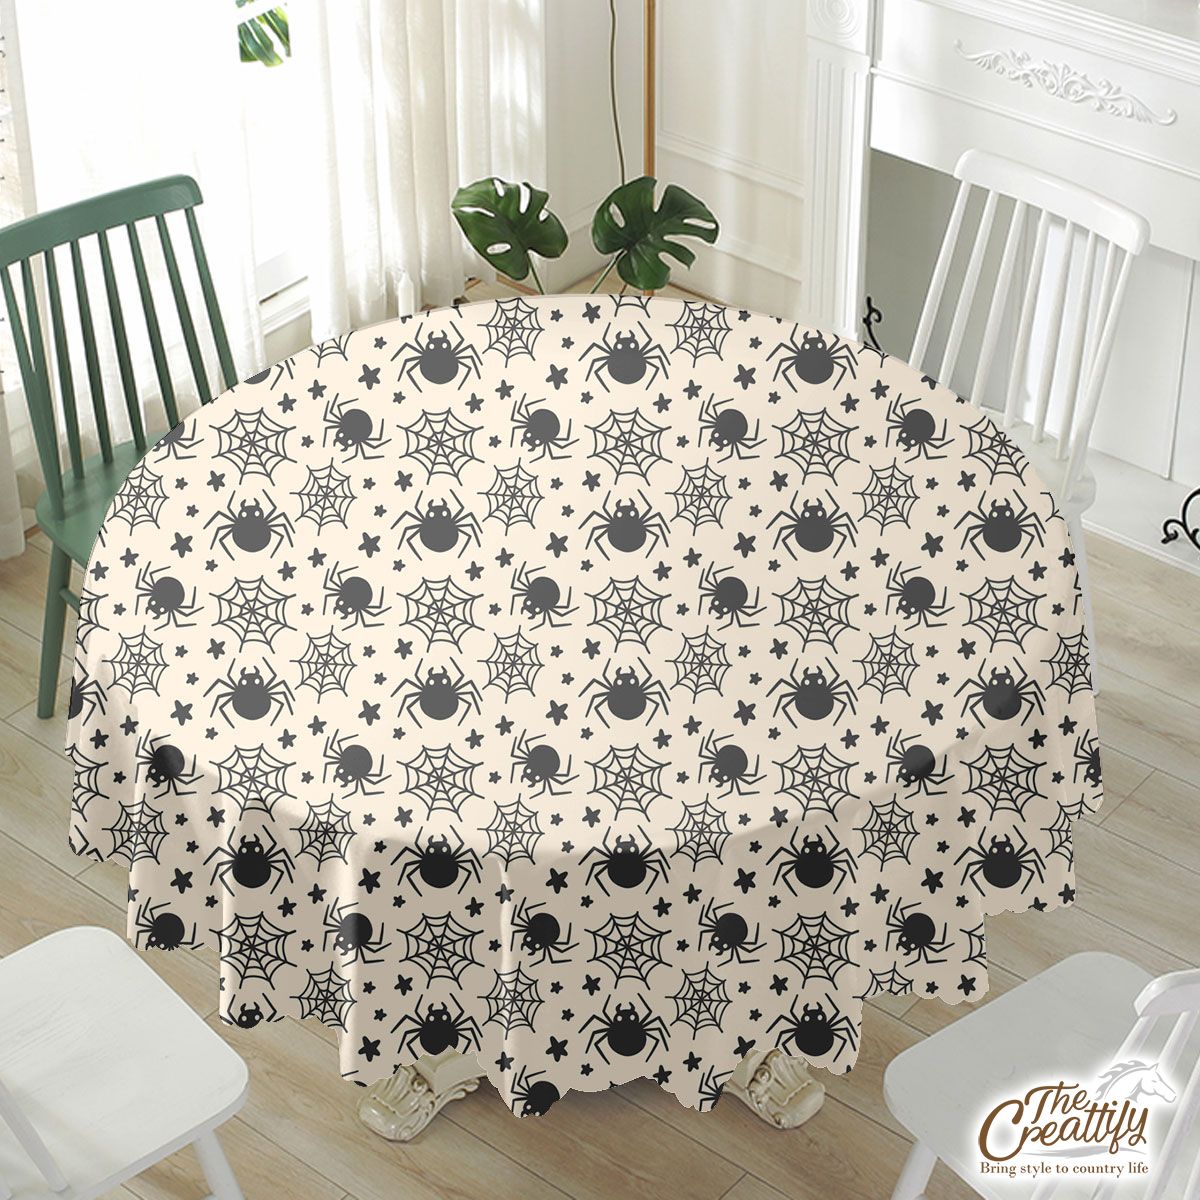 Black And White Seamless Spider Web Halloween Waterproof Tablecloth